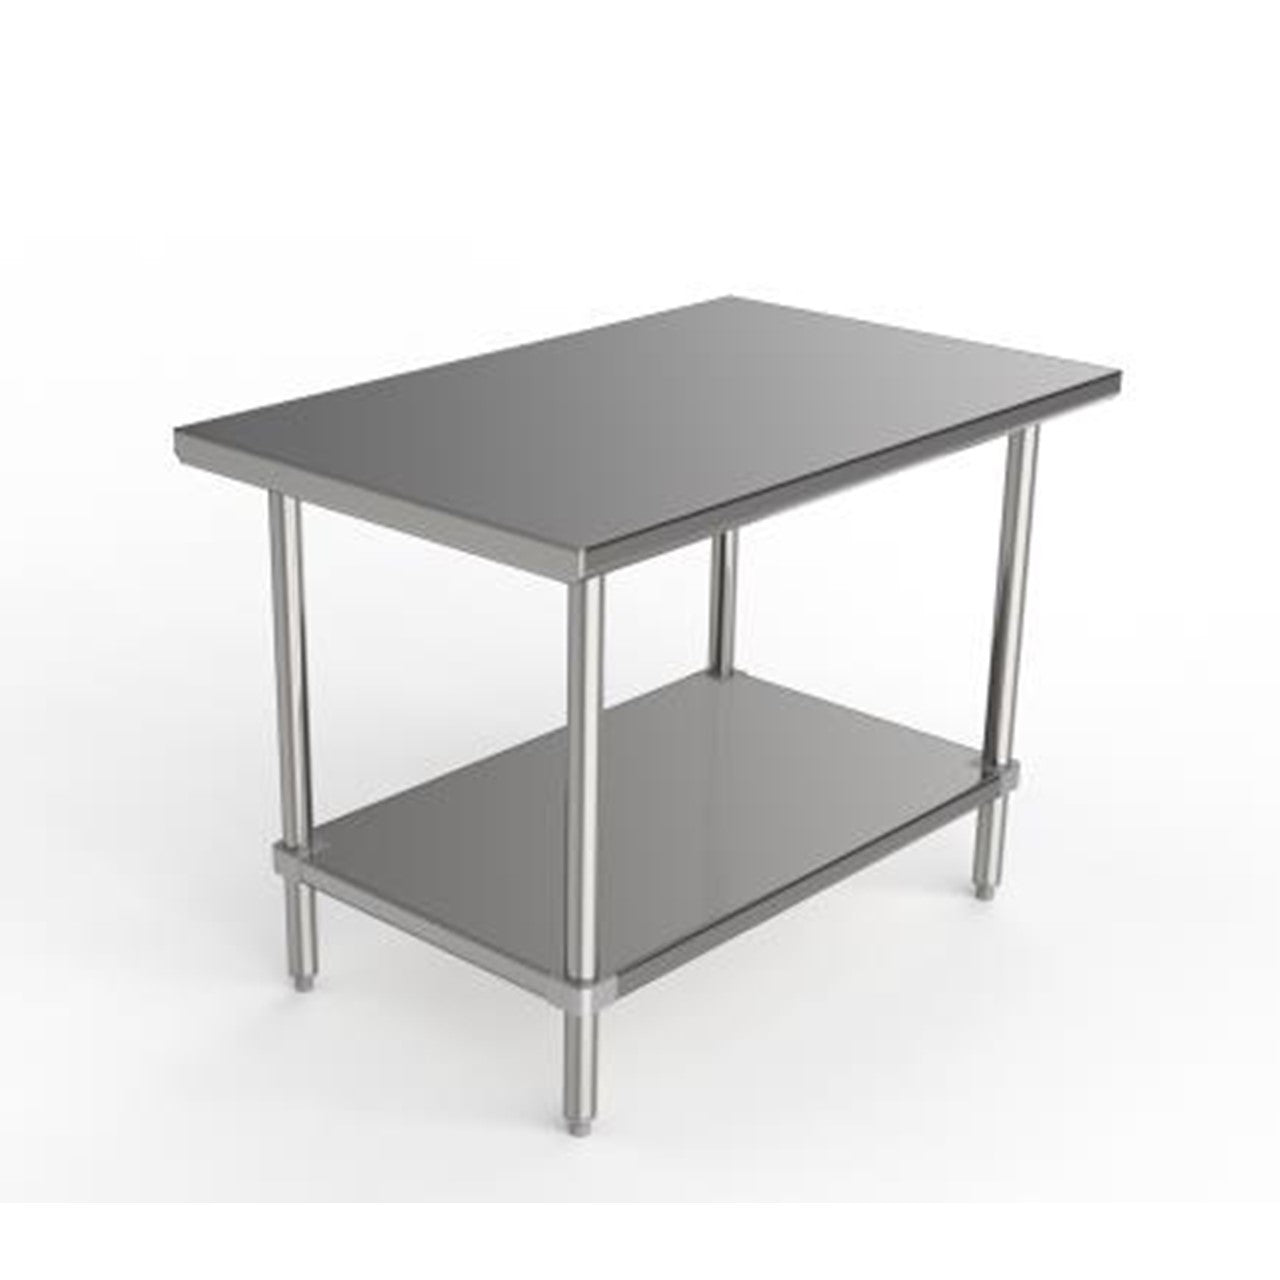 GSW Commercial Grade Flat Top Work Table with All Stainless Steel Top, Undershelf & Legs, Adjustable Bullet Feet, NSF/ETL Approved to Meet Sanitation Food Service Standard 37 (24"D x 36"L x 35"H)